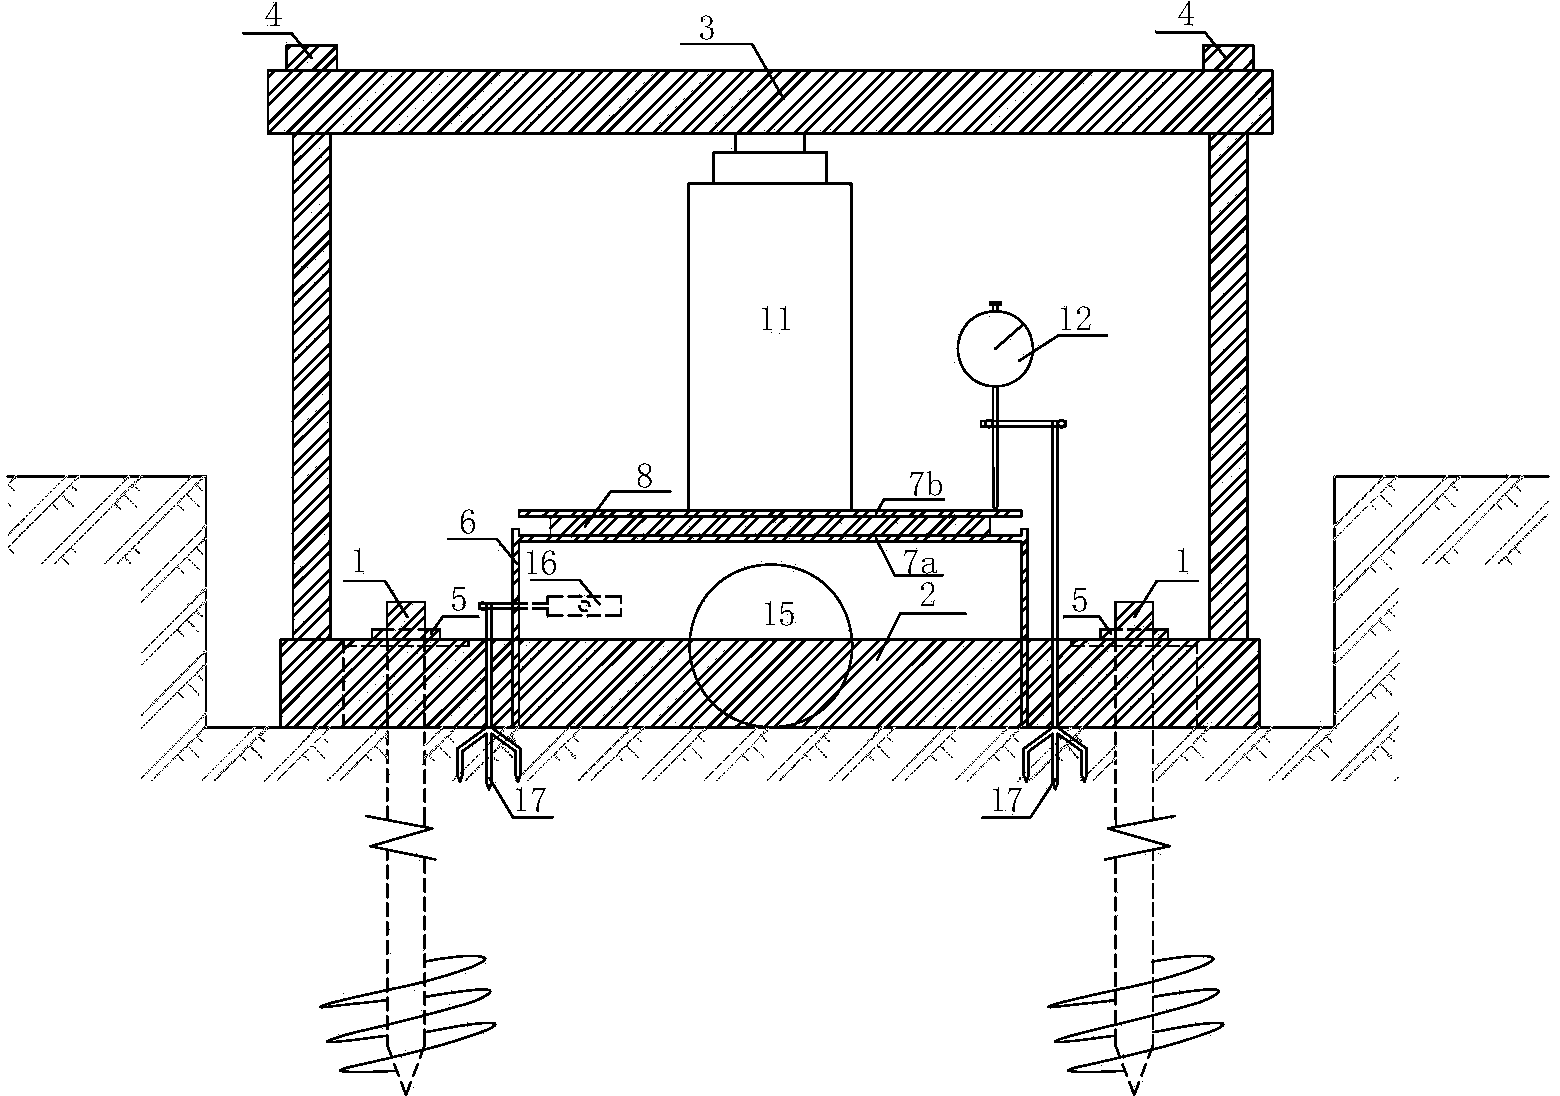 Method for detecting shear strength of clayey soil through large on-site direct shear test device